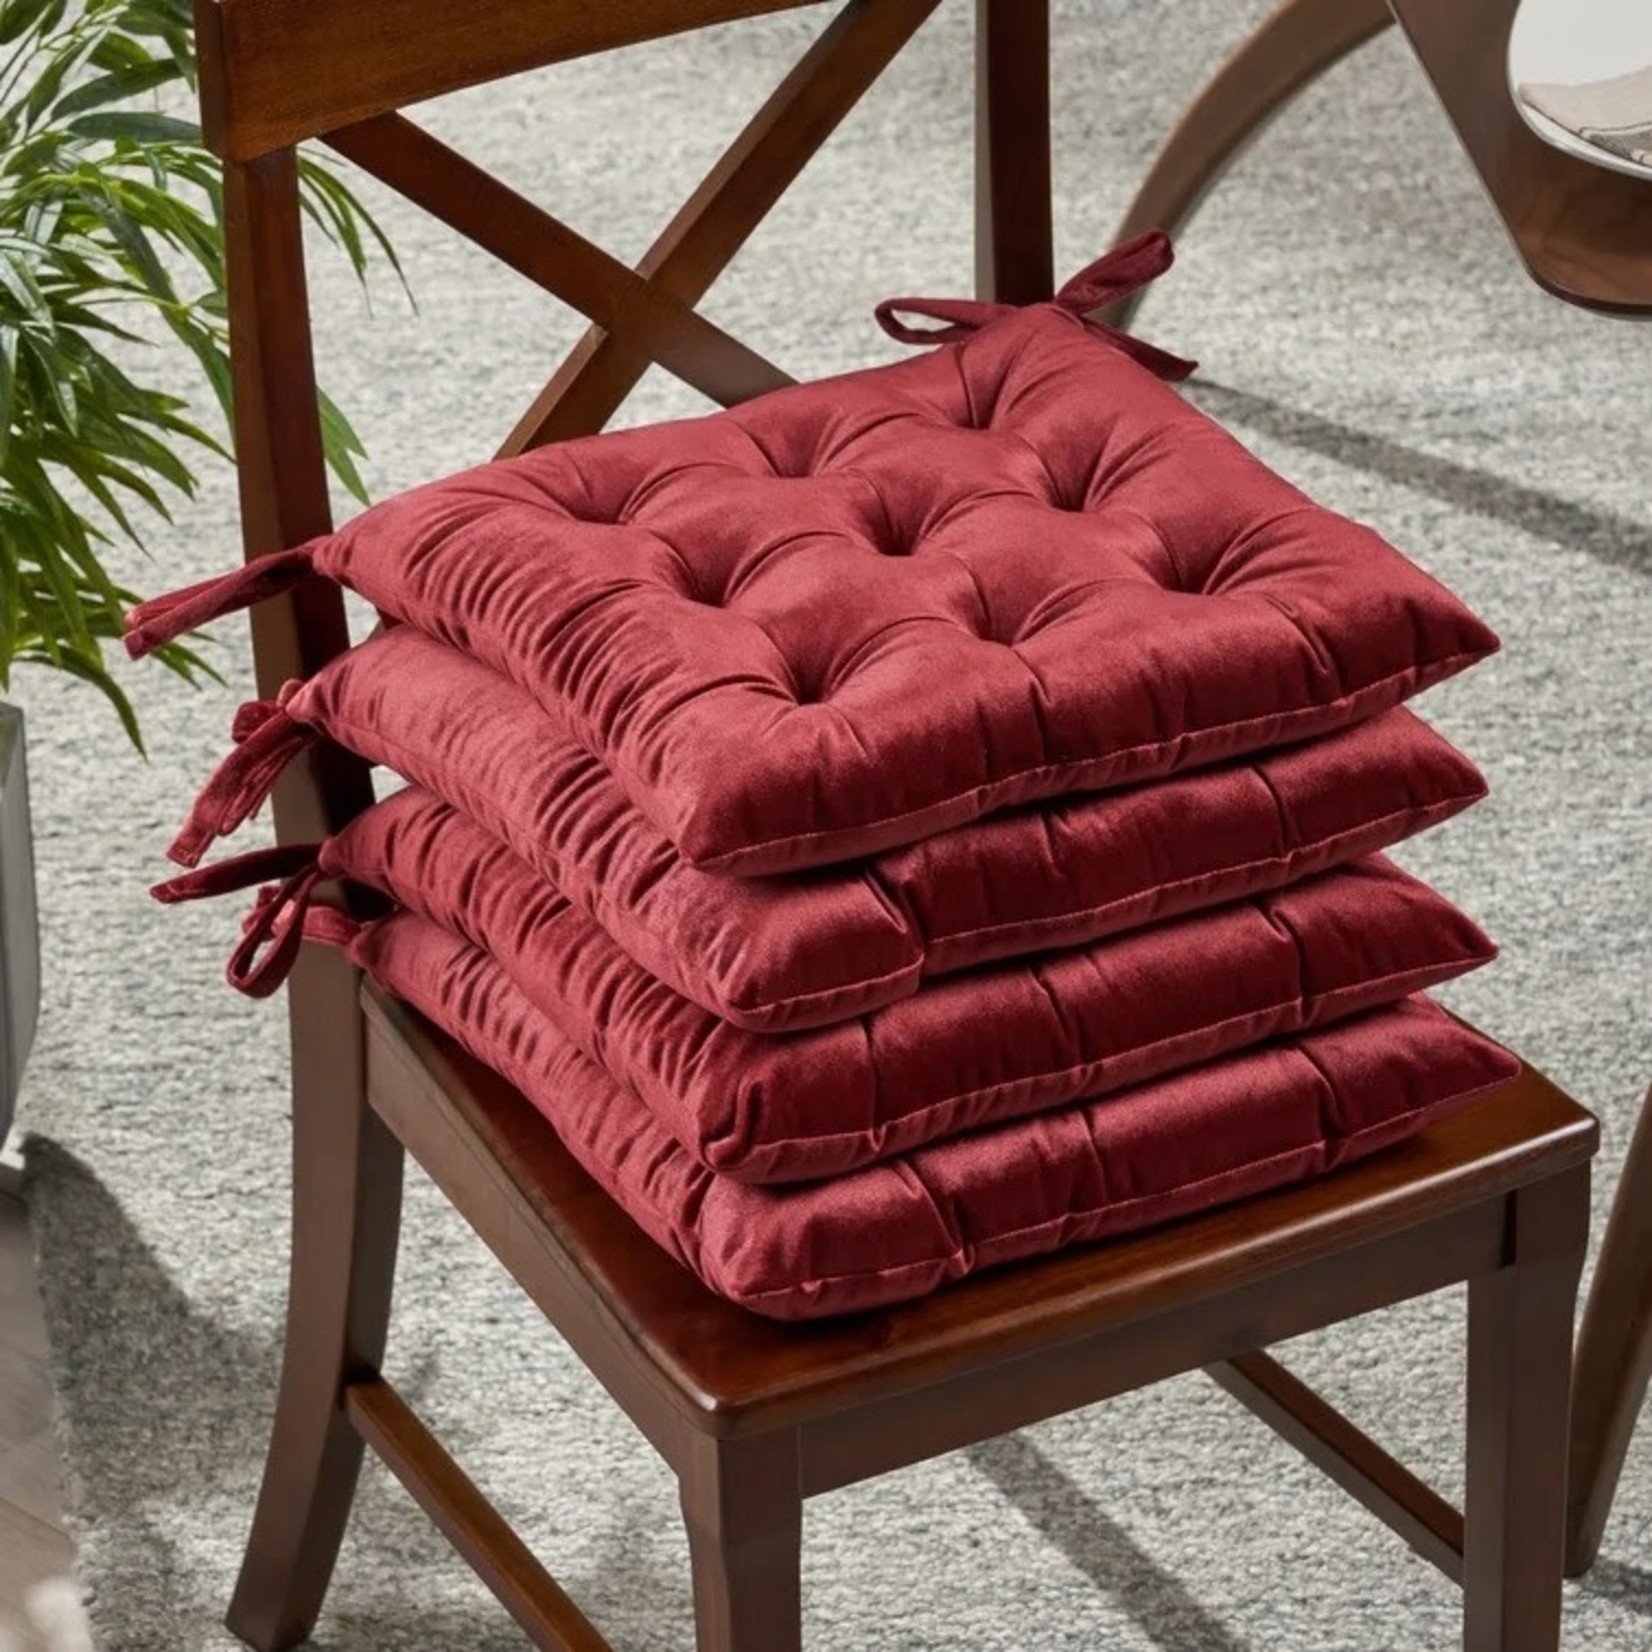 16"x16"Indoor Dining Chair Cushions - Set 4 - Berry - The Posh Pearl